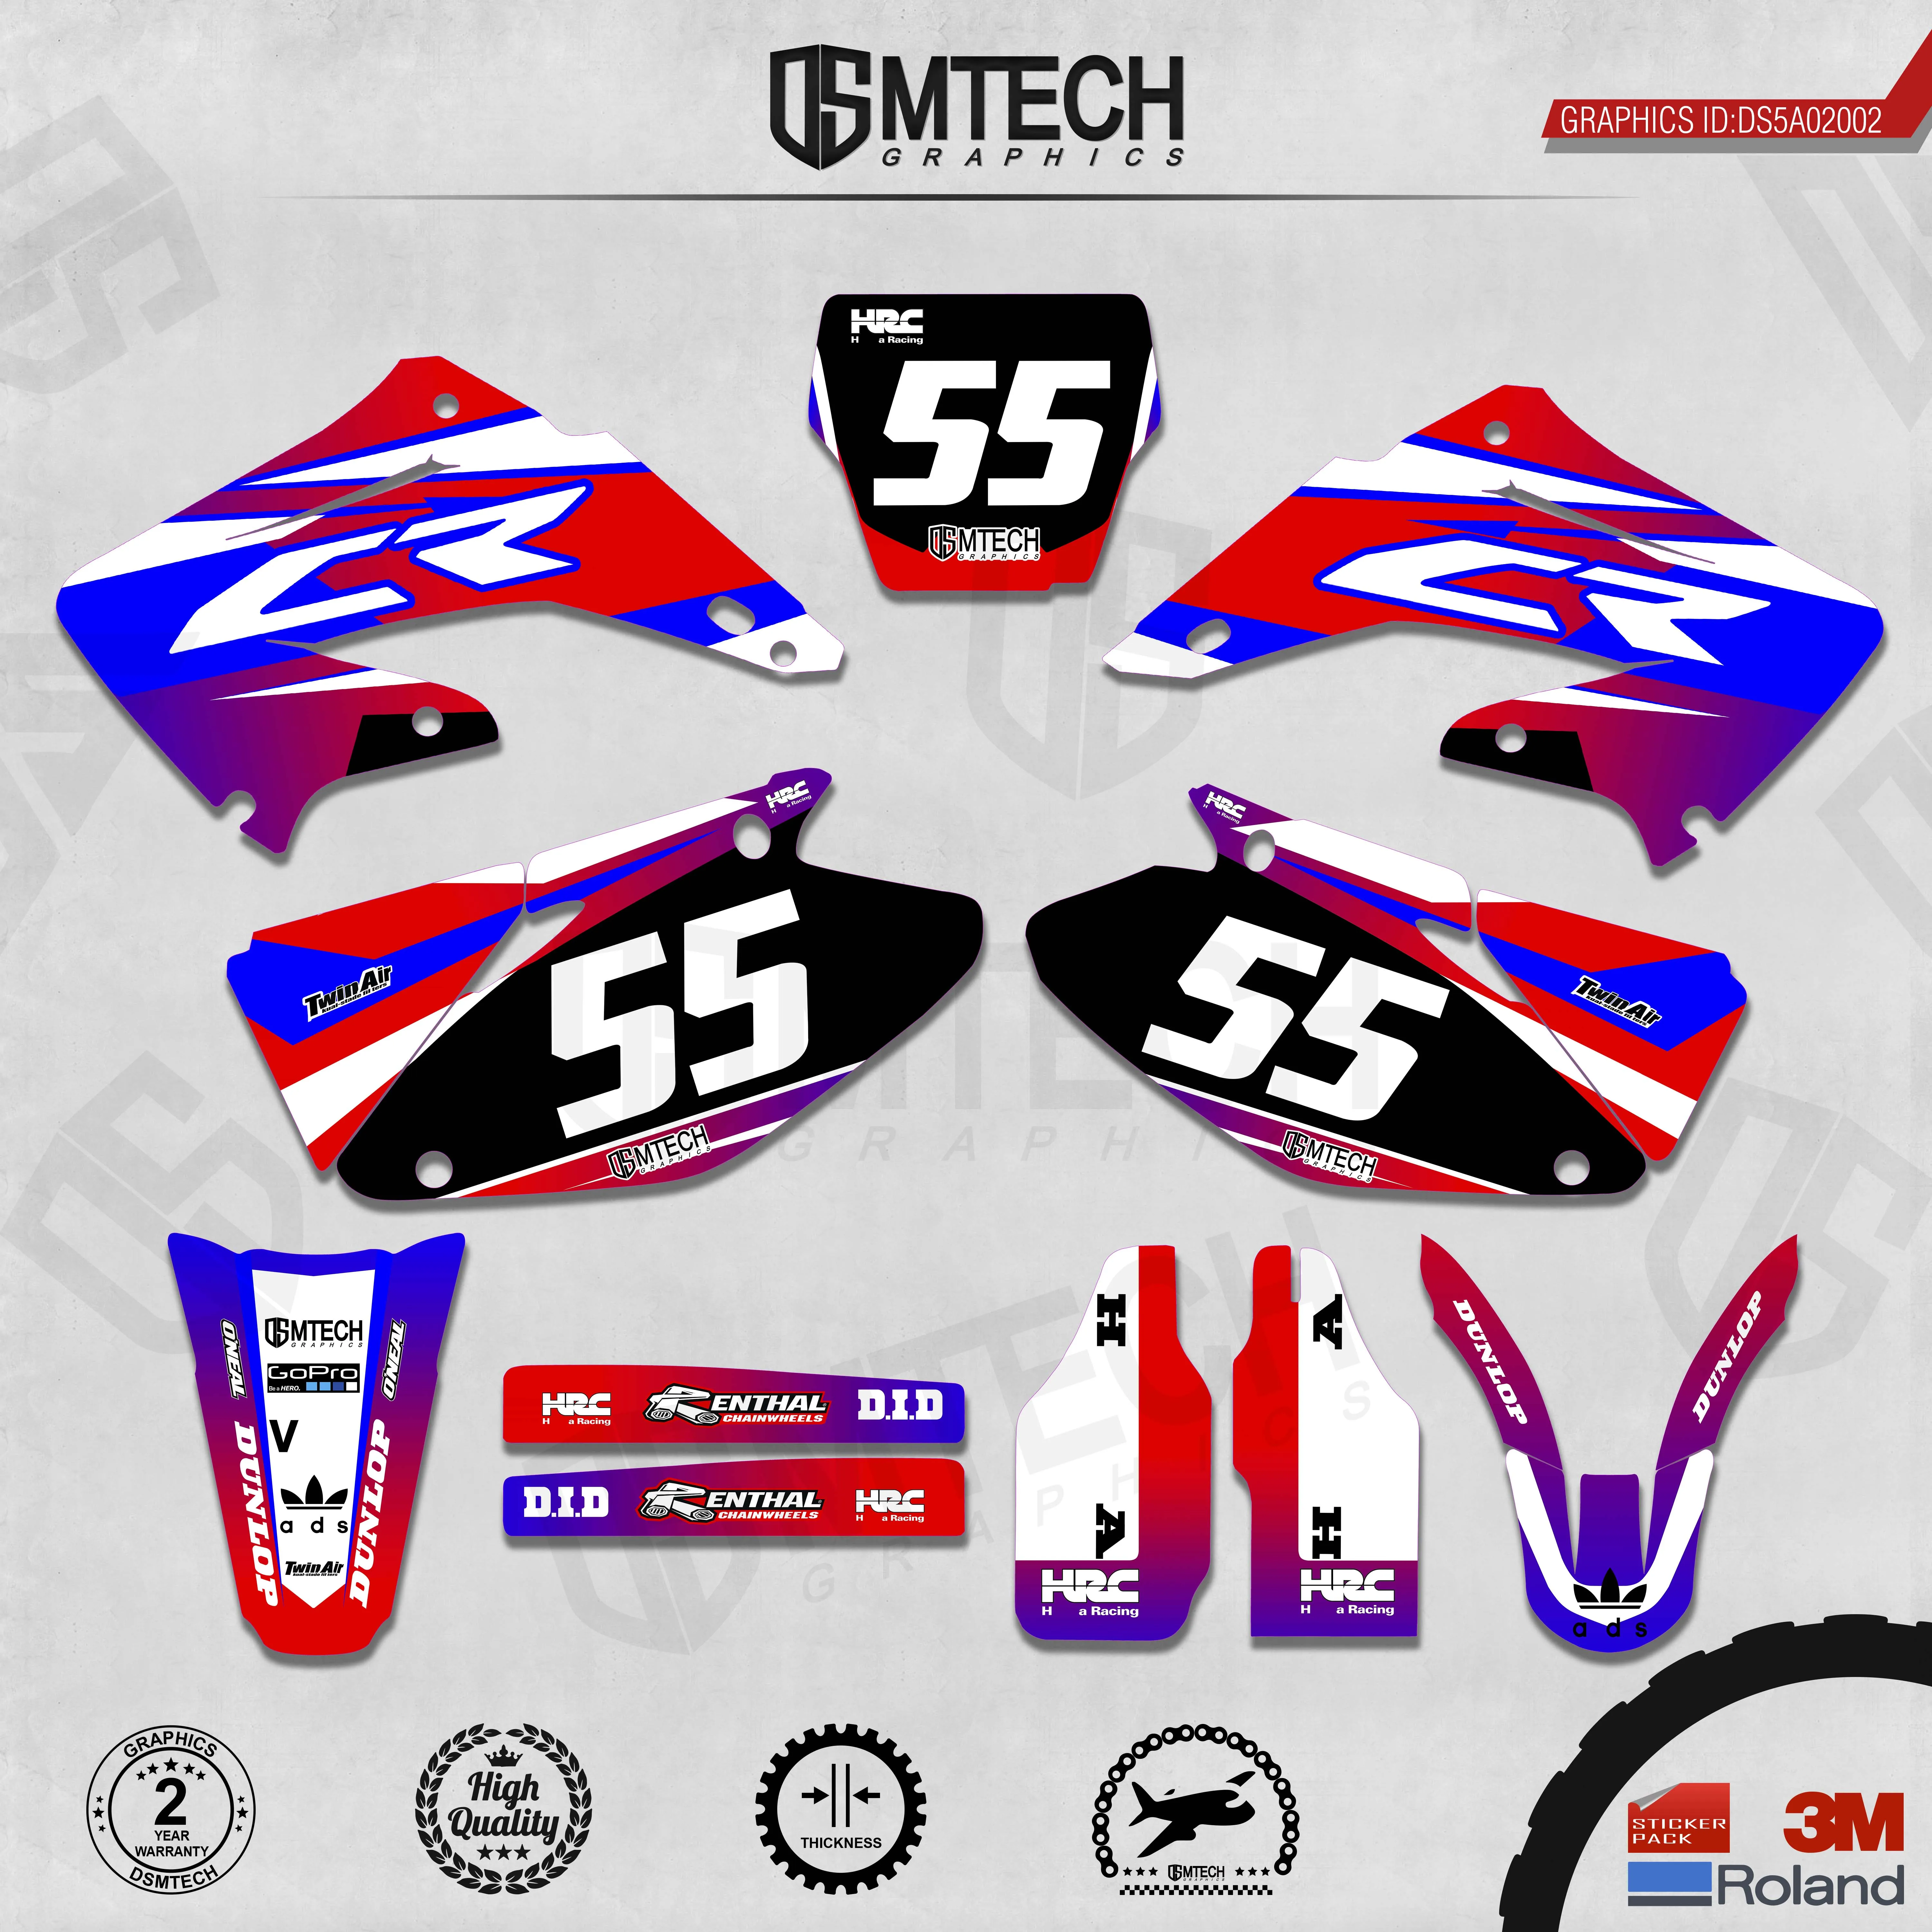 DSMTECH Customized Team Graphics Backgrounds Decals 3M Custom Stickers For 2002-2004 2005-2007 2008-2010 2011-2012 CR125-250 002 remotekey auto remote key fob 3 button 434mhz for ford 2004 2005 2006 2007 2008 2009 2010 2011 2012 remote control